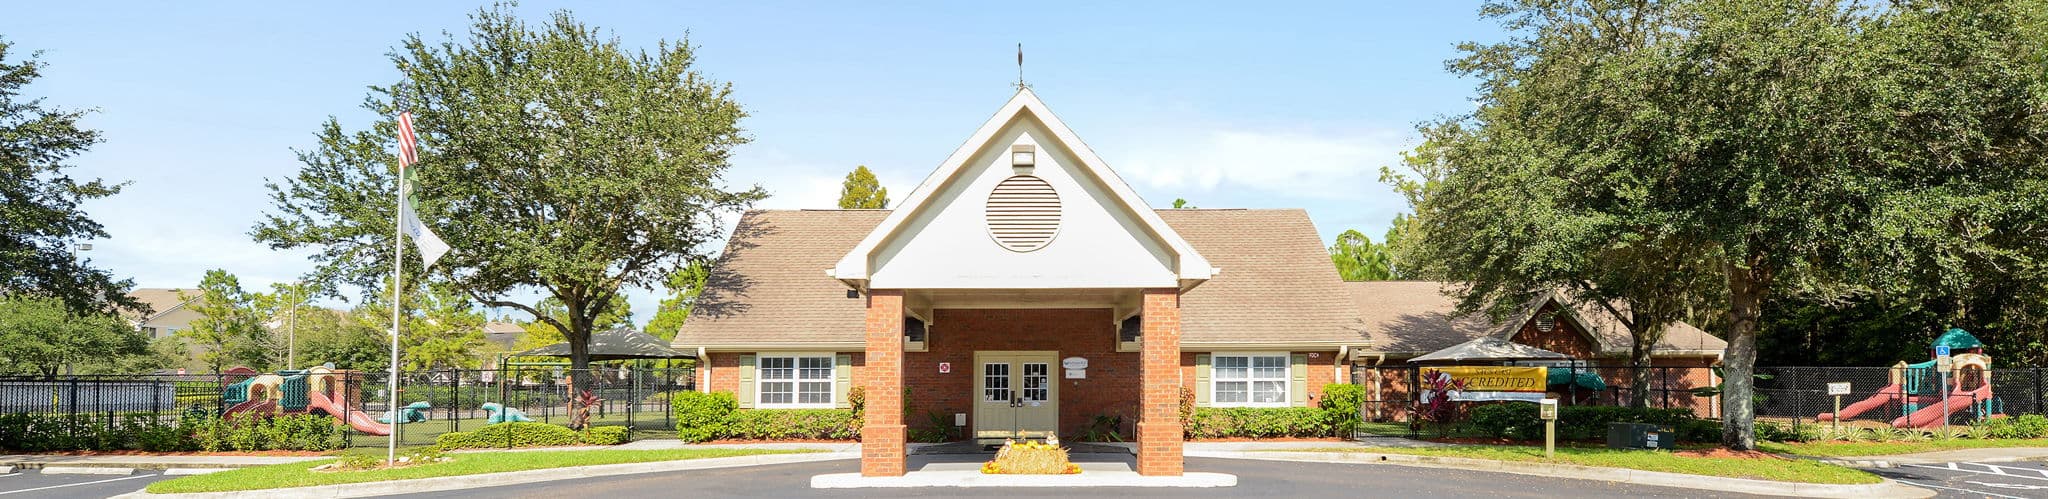 Exterior of a Primrose School of Westchase